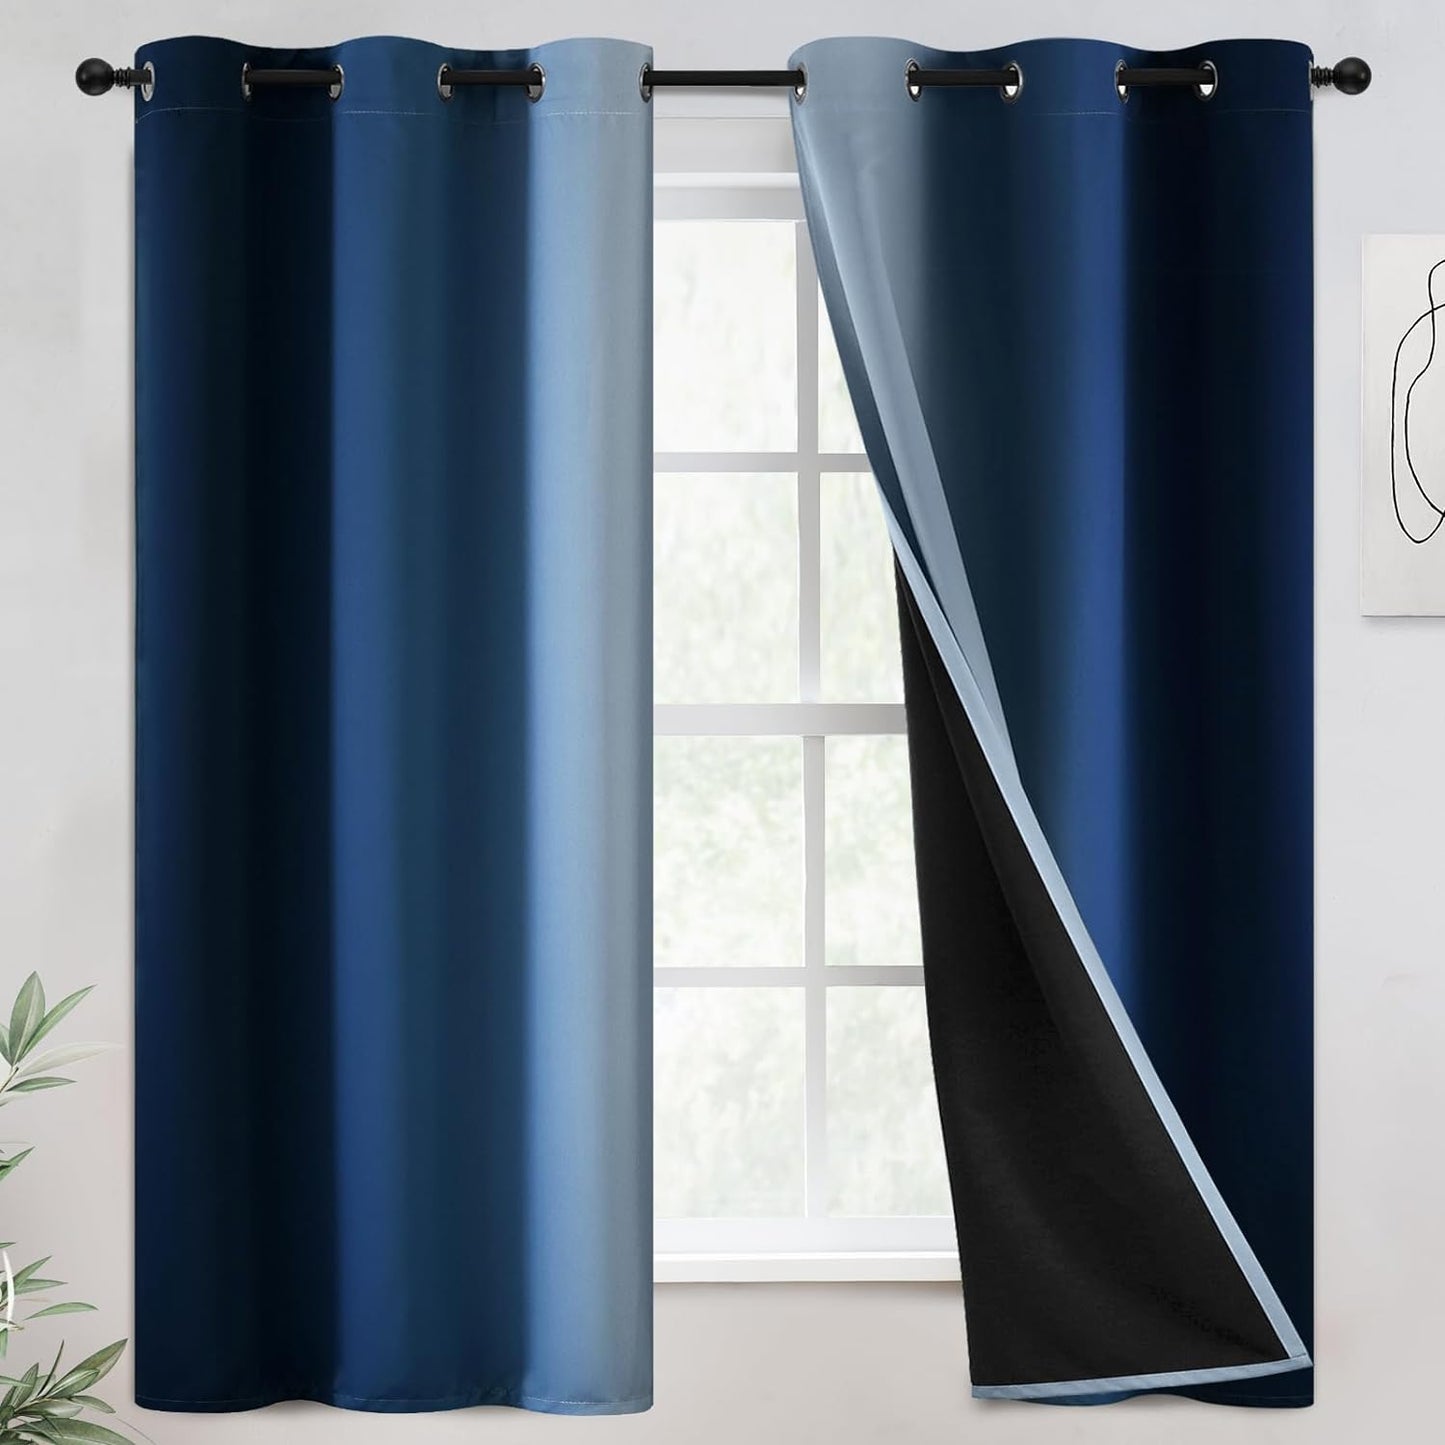 COSVIYA 100% Blackout Curtains & Drapes Ombre Purple Curtains 63 Inch Length 2 Panels,Full Room Darkening Grommet Gradient Insulated Thermal Window Curtains for Bedroom/Living Room,52X63 Inches  COSVIYA Blue To Greyish White 42W X 63L 